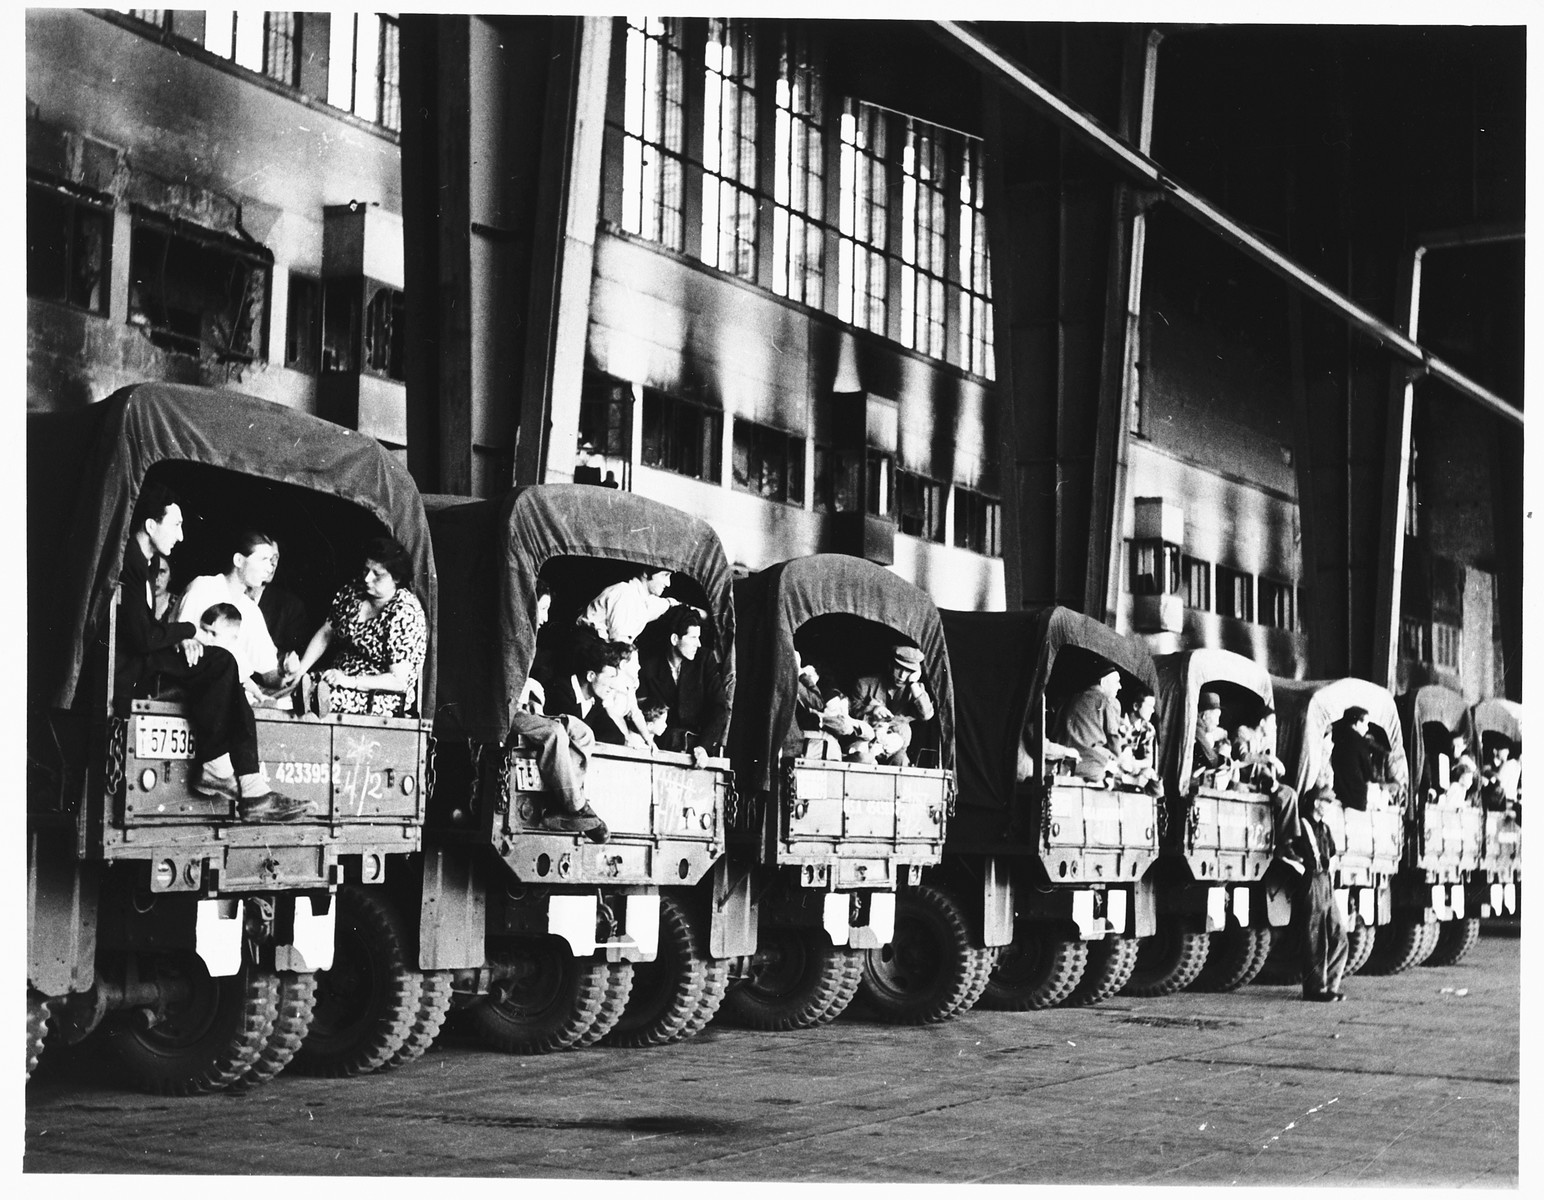 Canvas covered trucks packed with Jewish DPs [who are being evacuated to Frankfurt am Main during the Berlin Blockade] are parked in a row [probably at a Berlin airport].